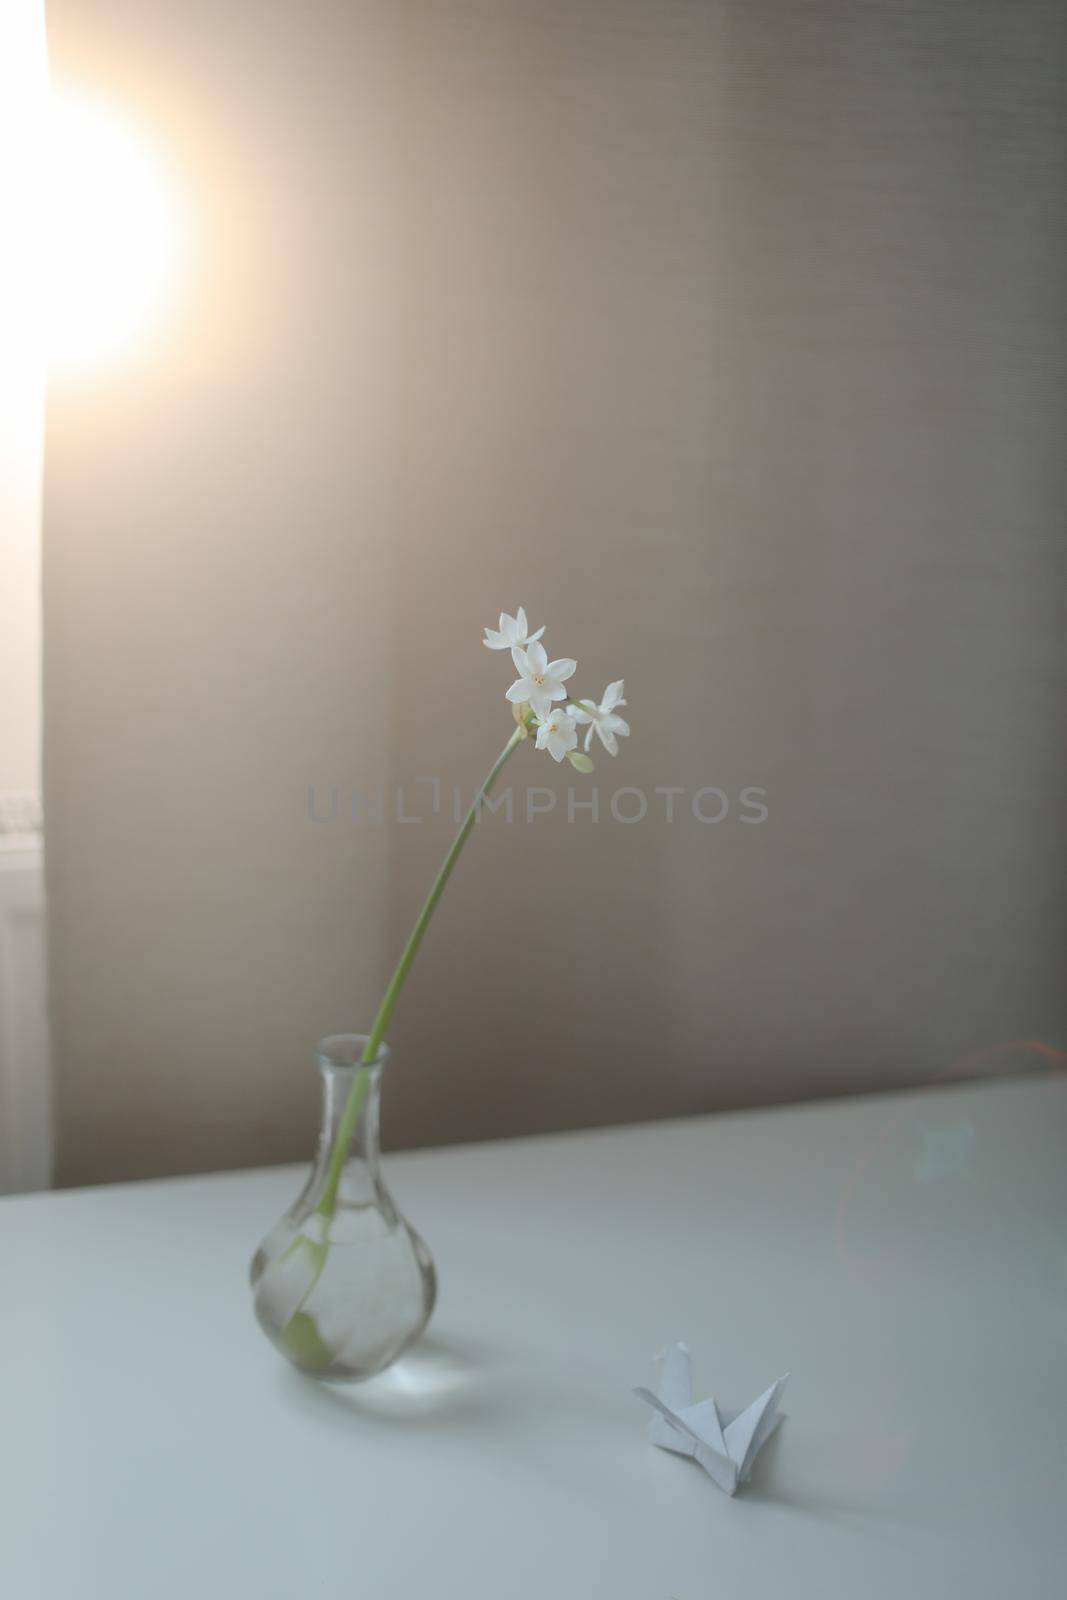 daffodil in a vase on the table in a sunny room